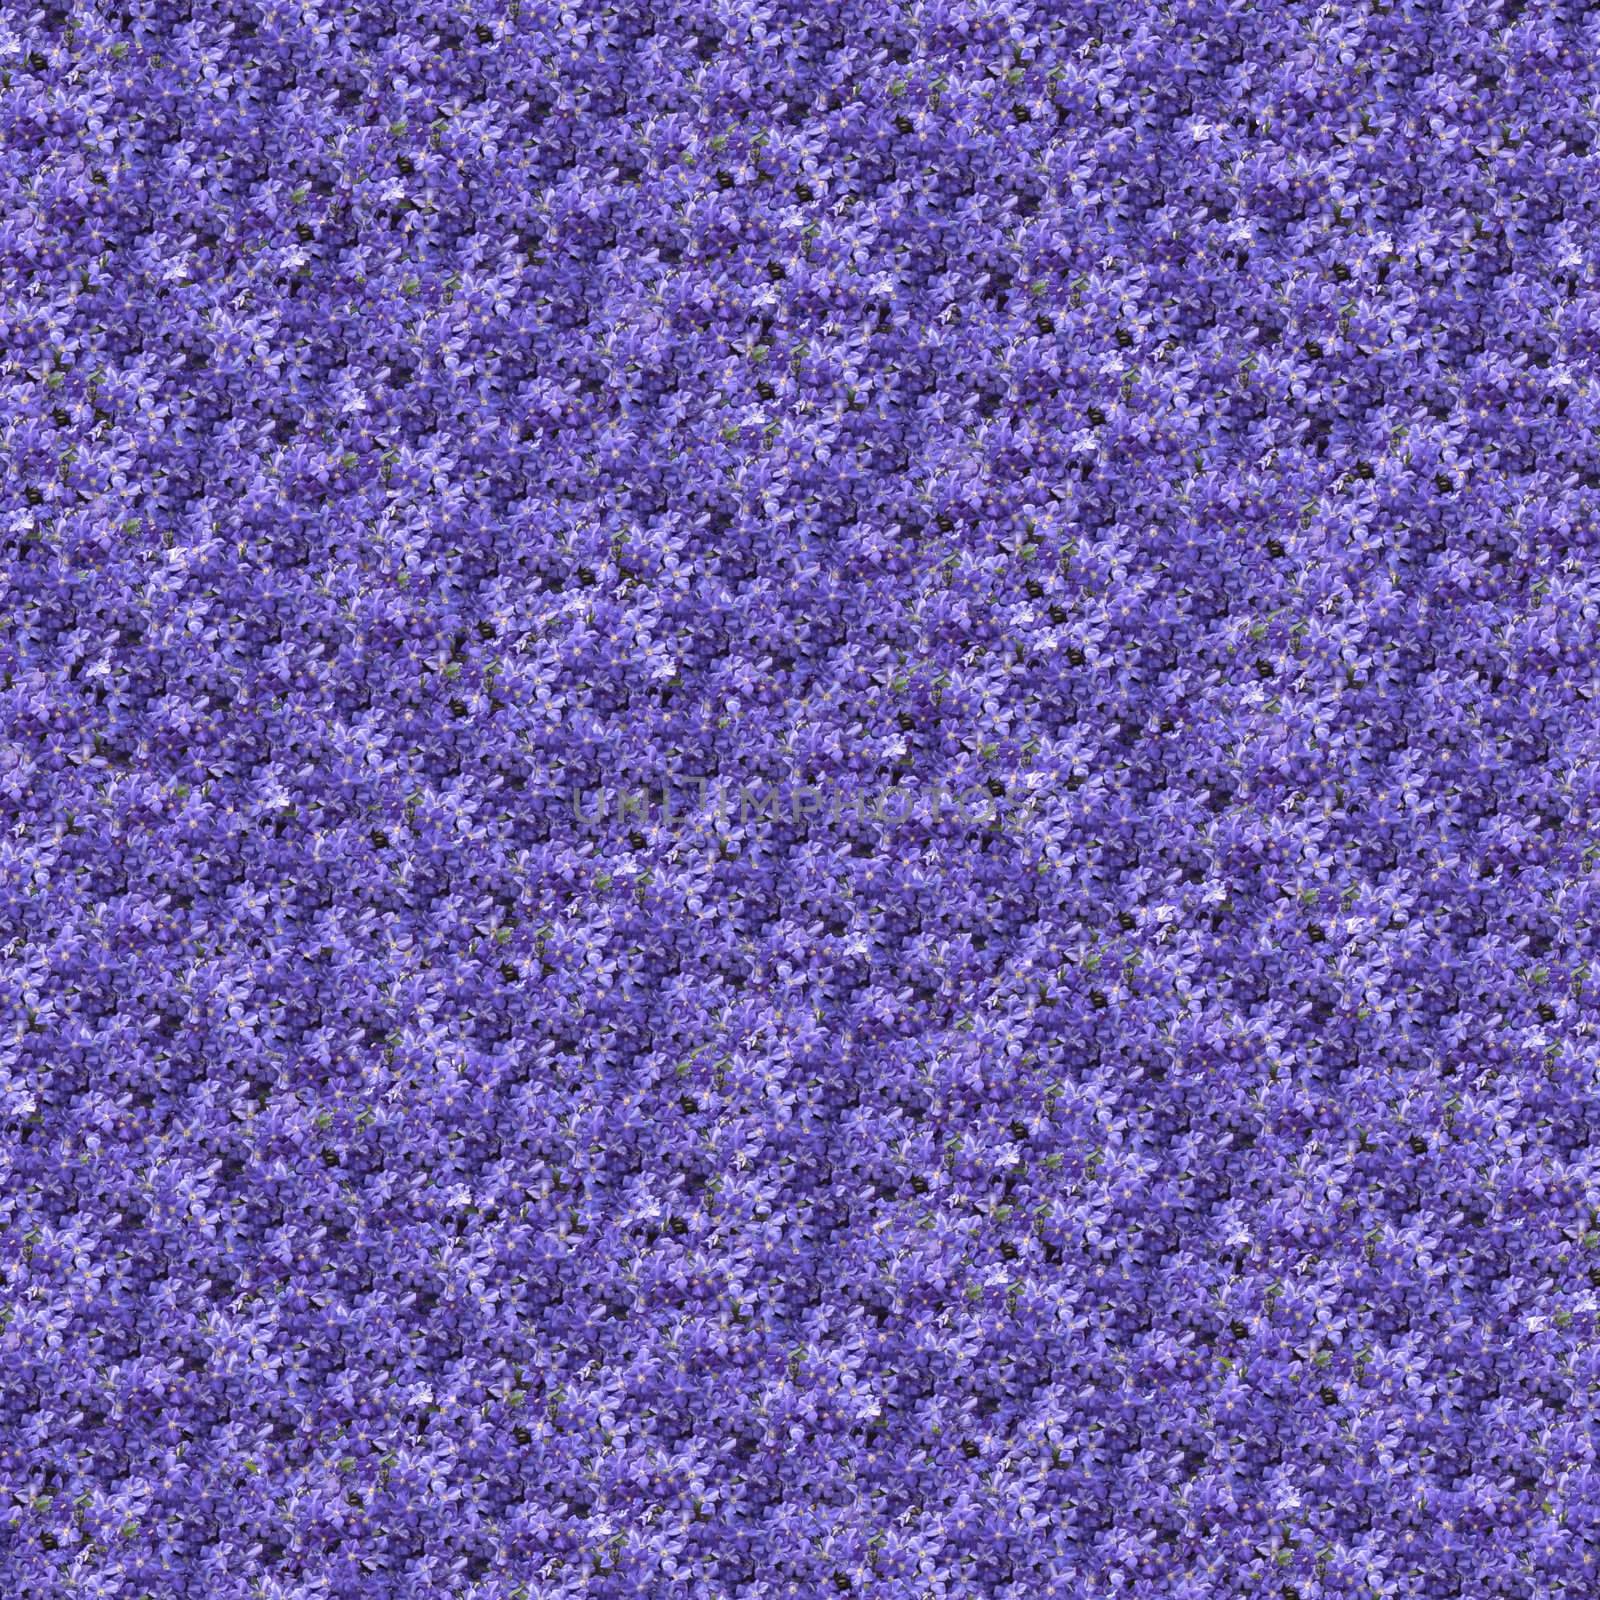 Seamless pattern made of clematis flowers. It's composable like tiles without visible connecting line between parts